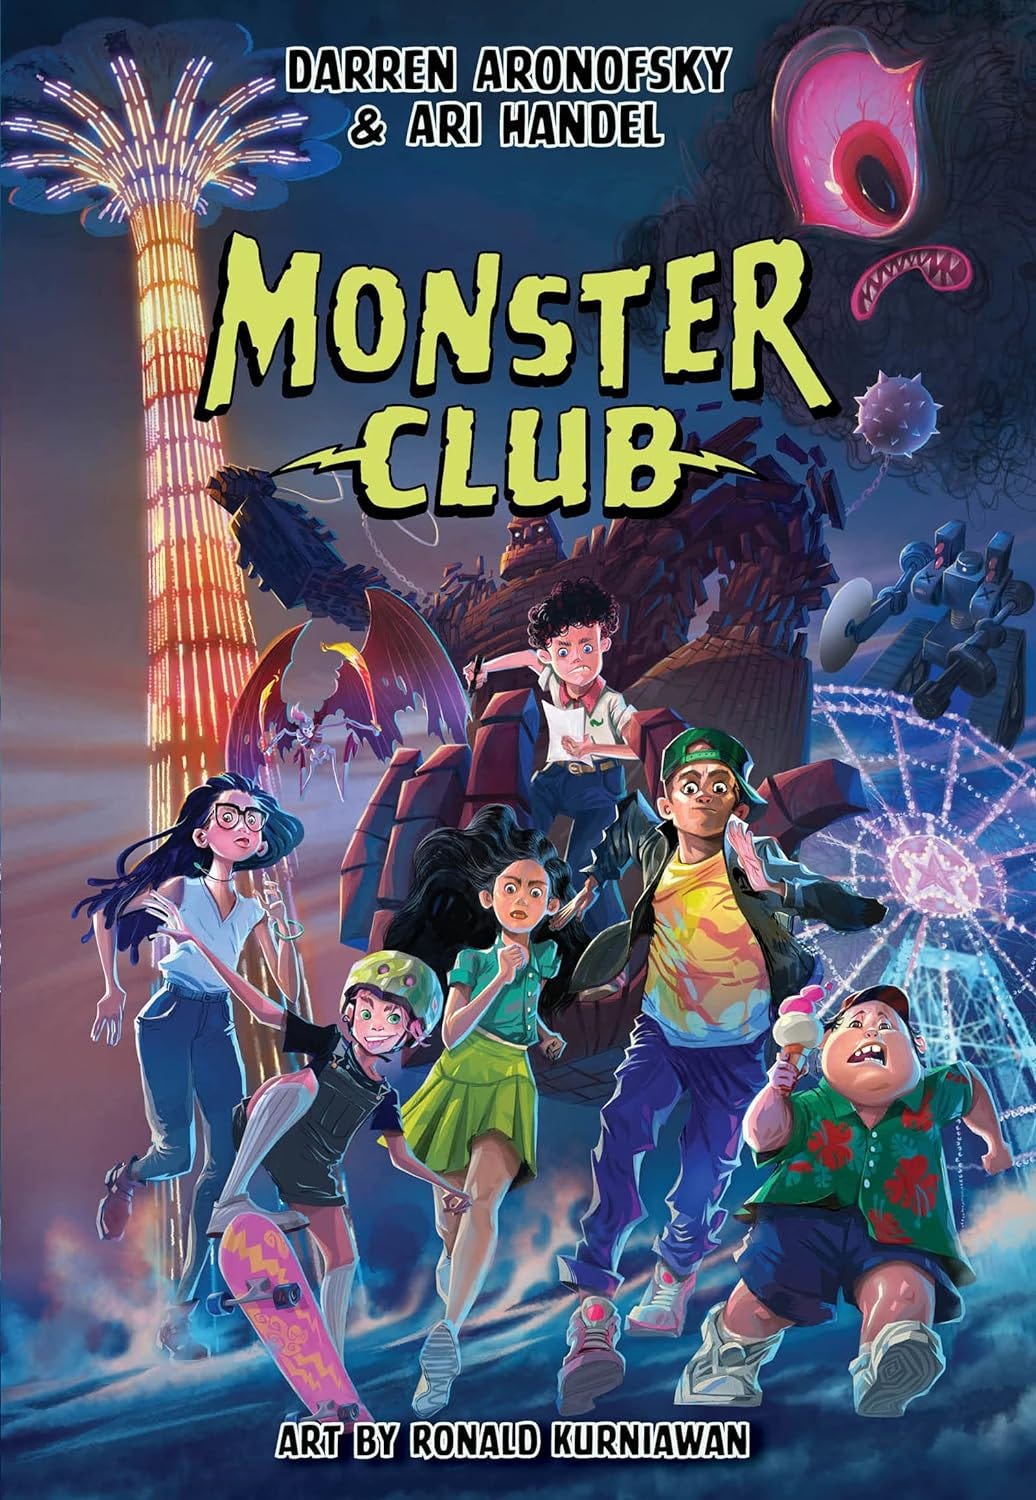 The cover of Monster Club shows a group of tweens running away from oversized monsters at Coney Island